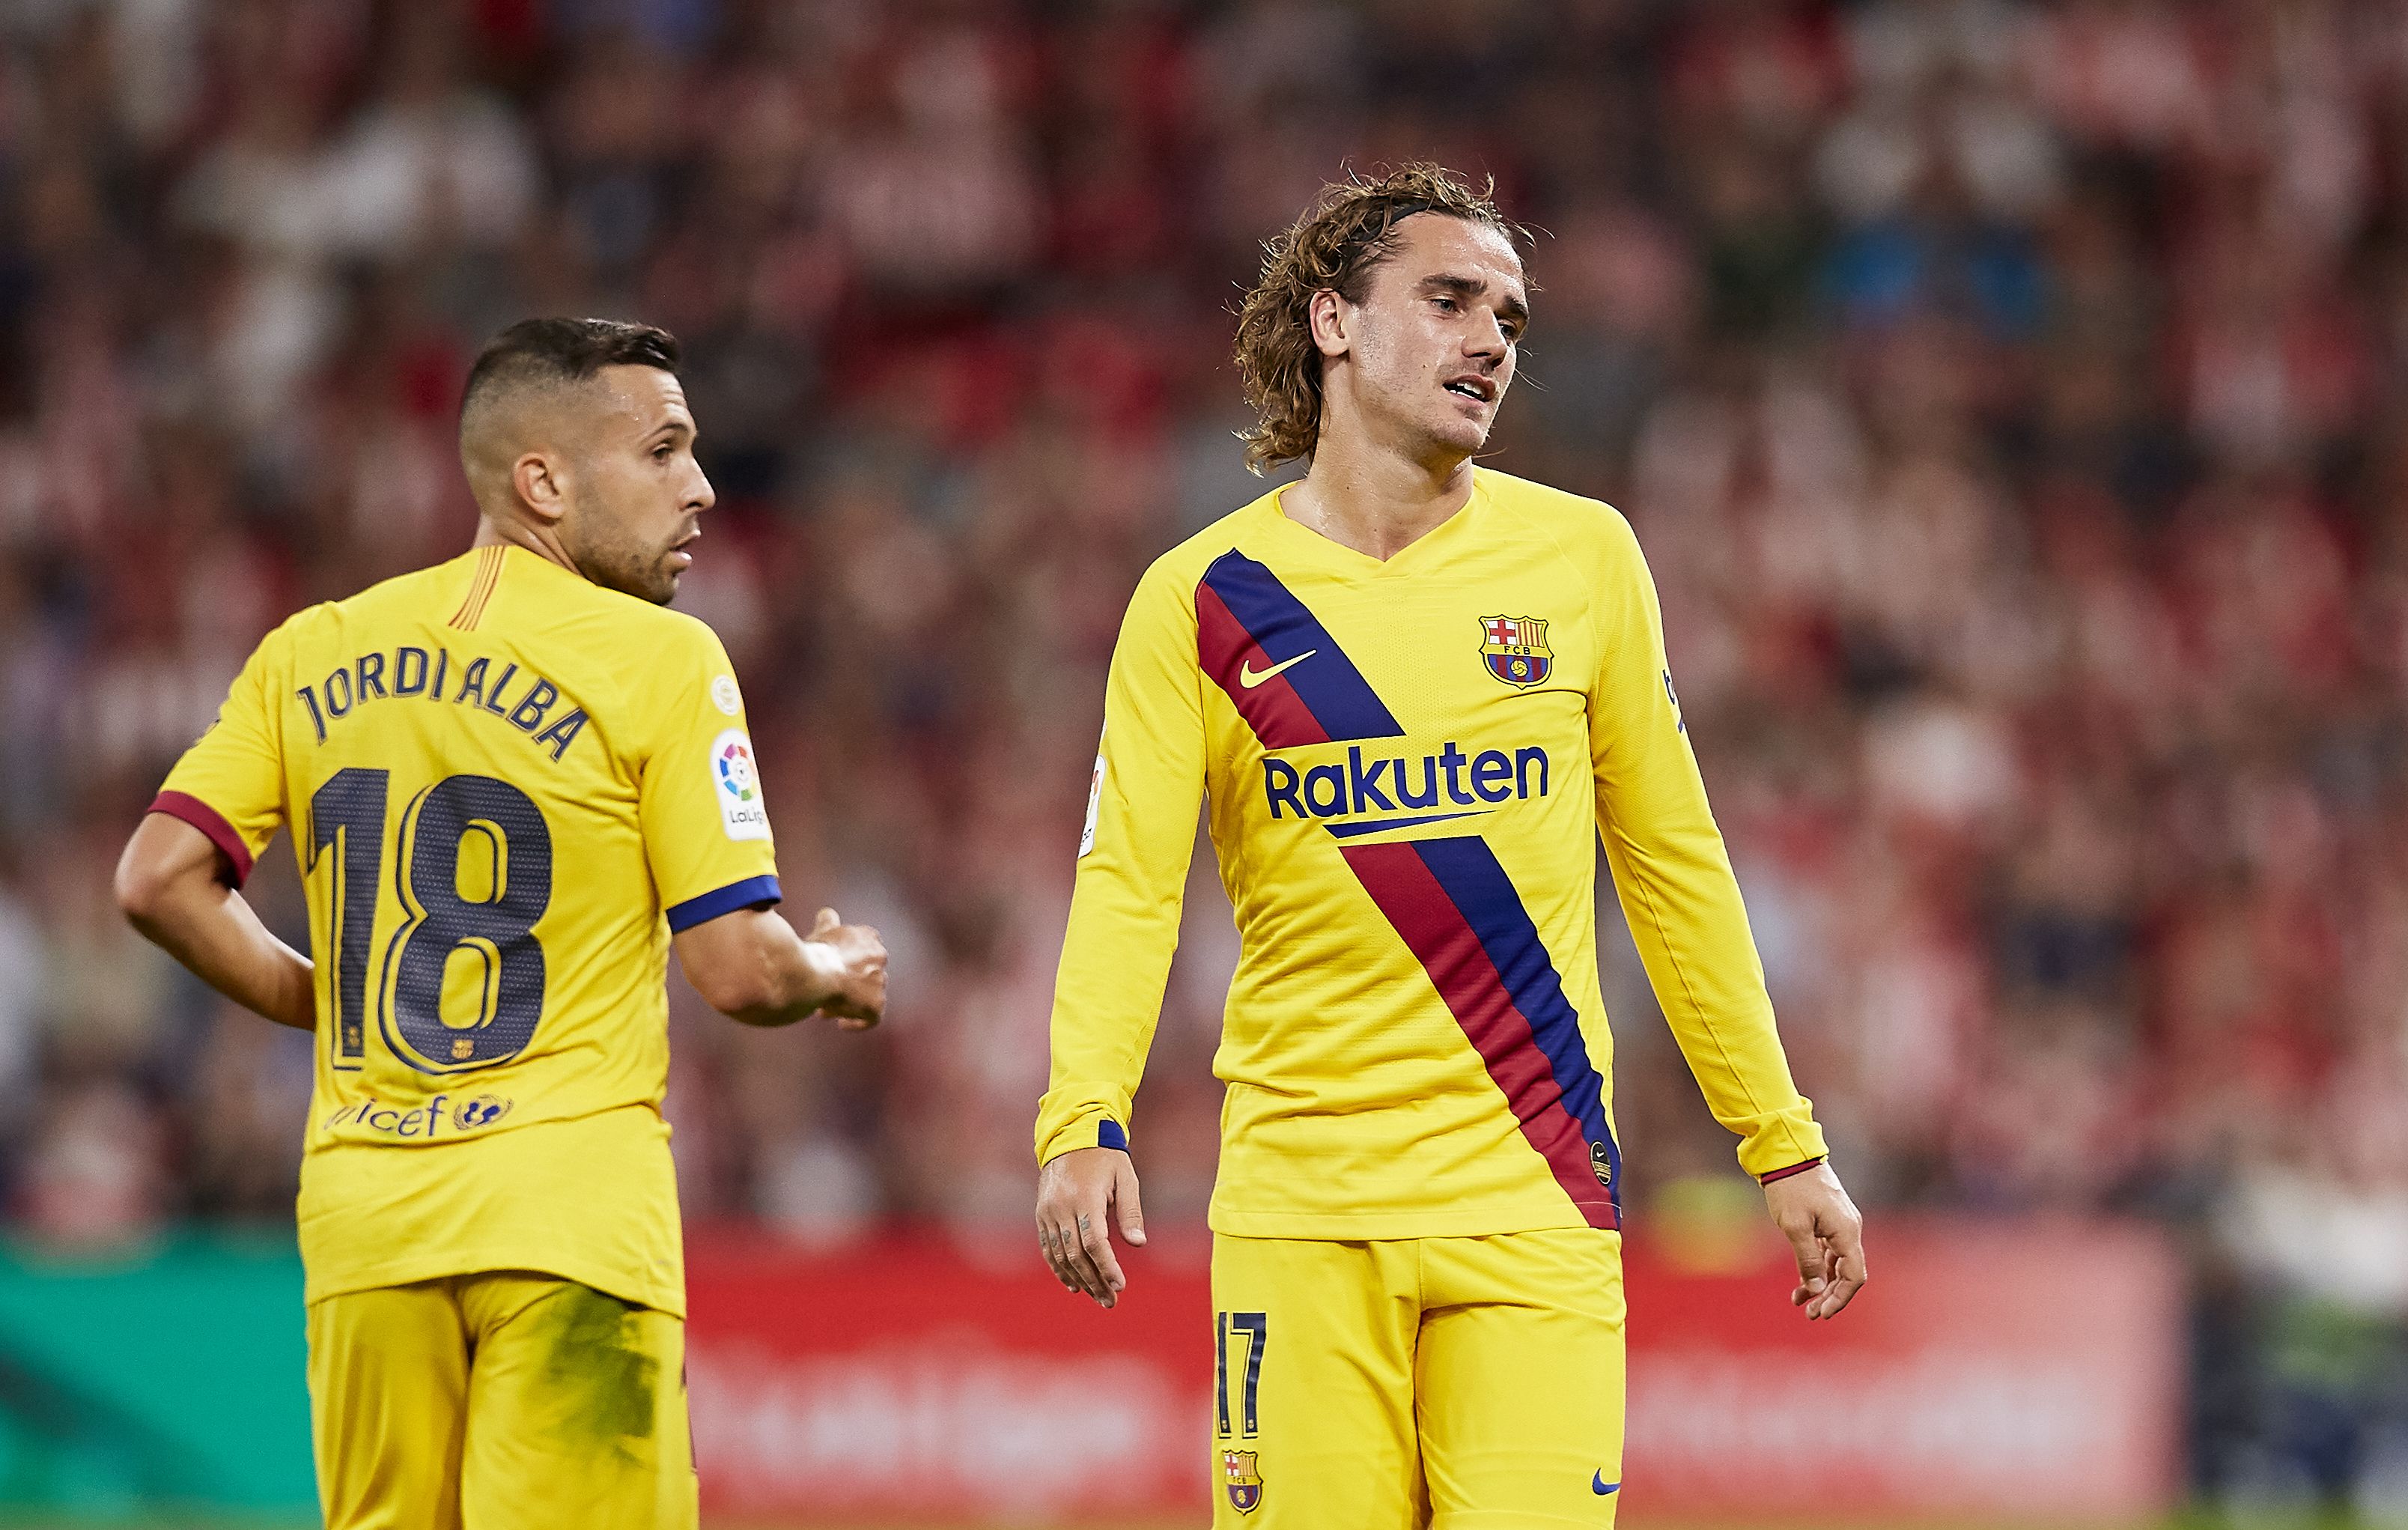 Griezmann could be the key for Barcelona against Betis